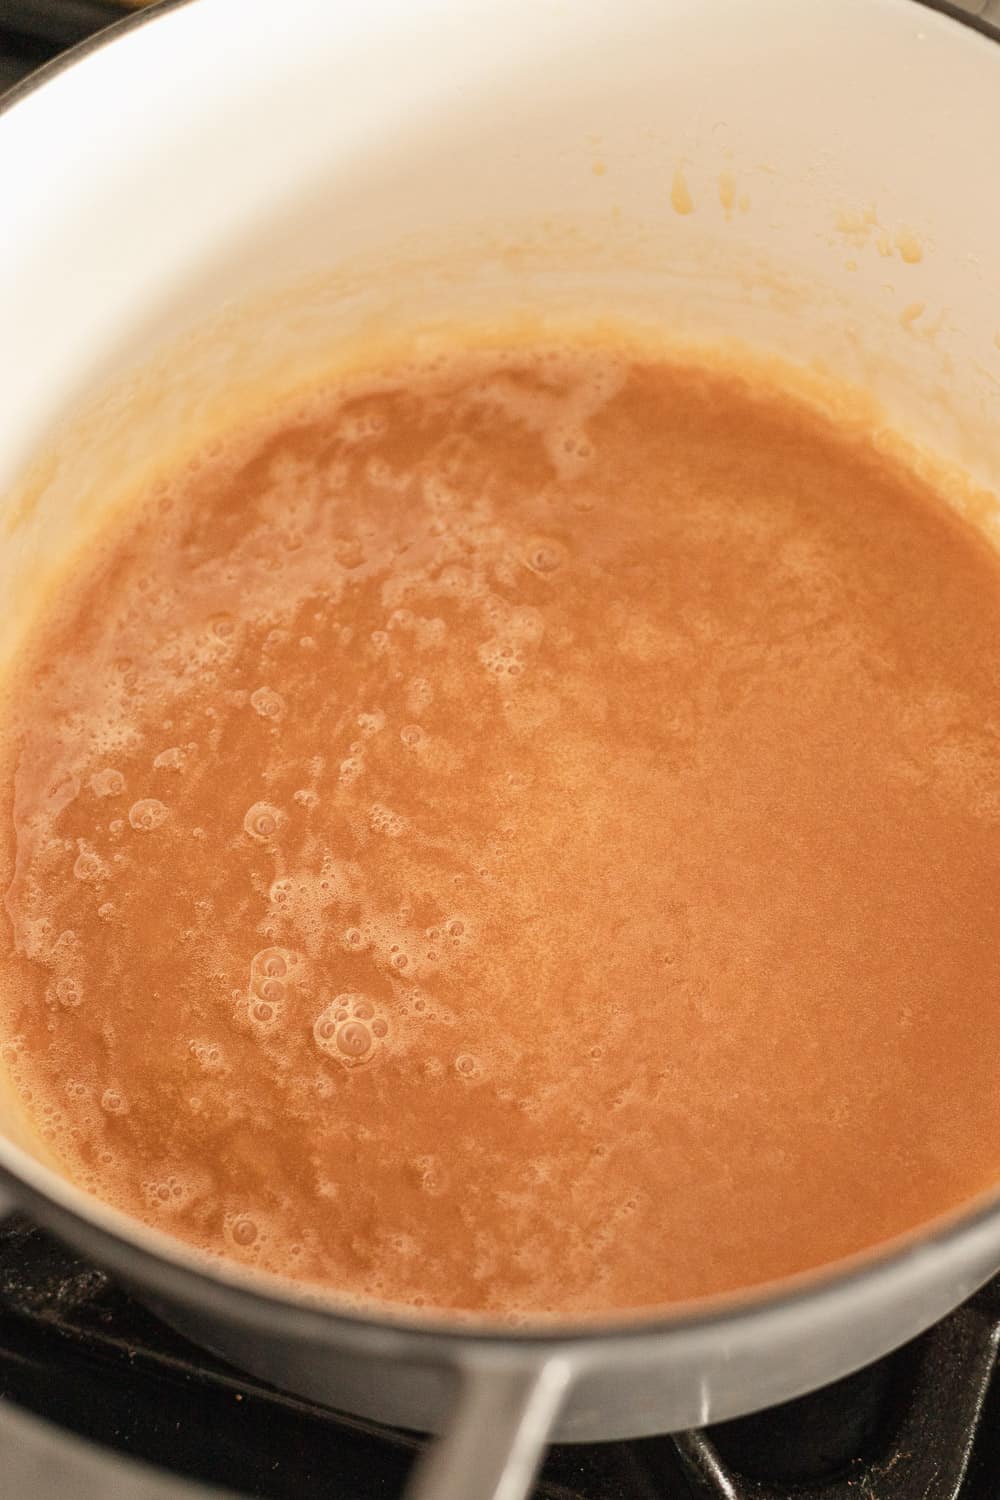 the caramel after it is done in the pot